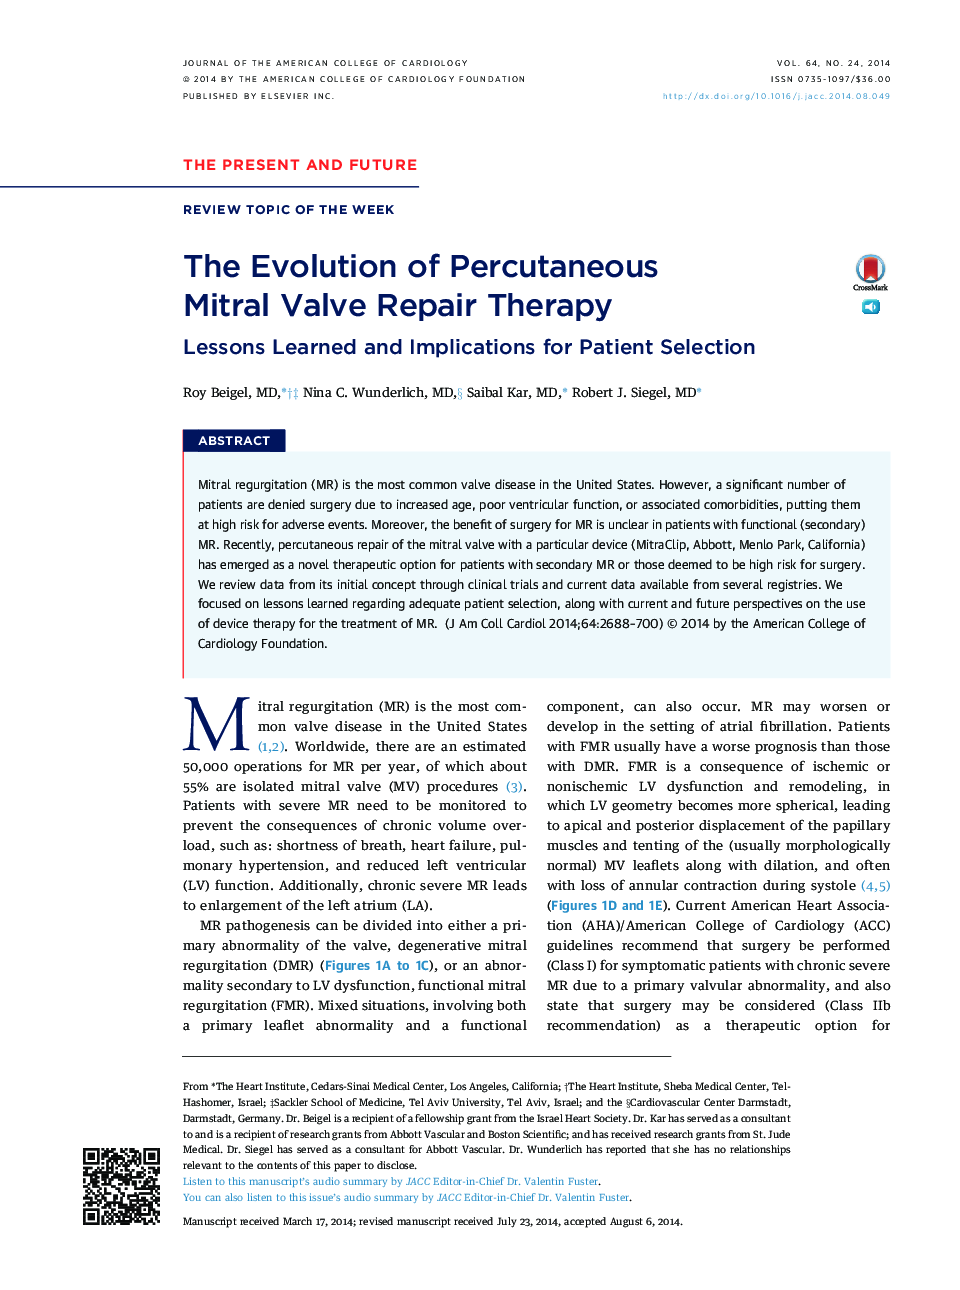 The Evolution of Percutaneous MitralÂ ValveÂ Repair Therapy: Lessons Learned and Implications for Patient Selection